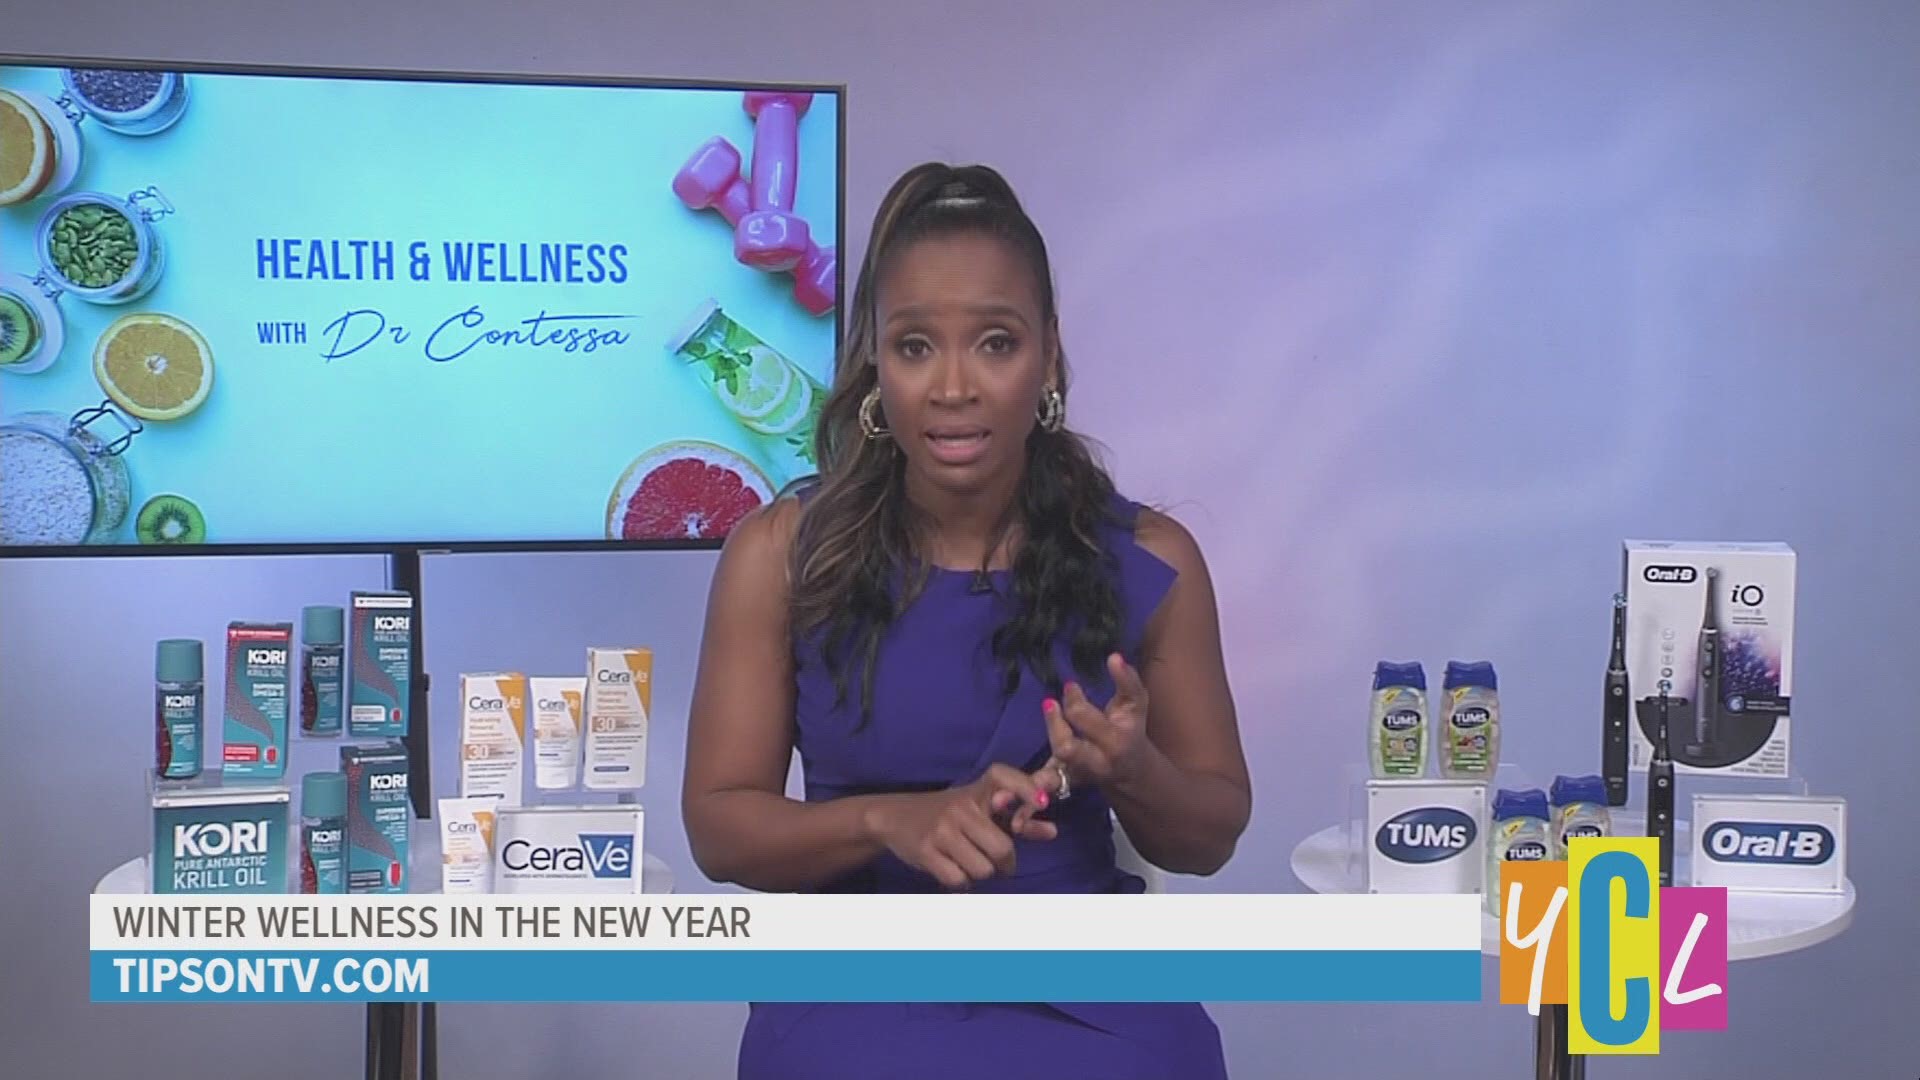 Dr. Contessa of "Married to Medicine" explains her top keys for a healthy 2021. This segment was paid for by Kori Pure Antartic Krill Oil, CeraVe, TUMS and Oral-B.